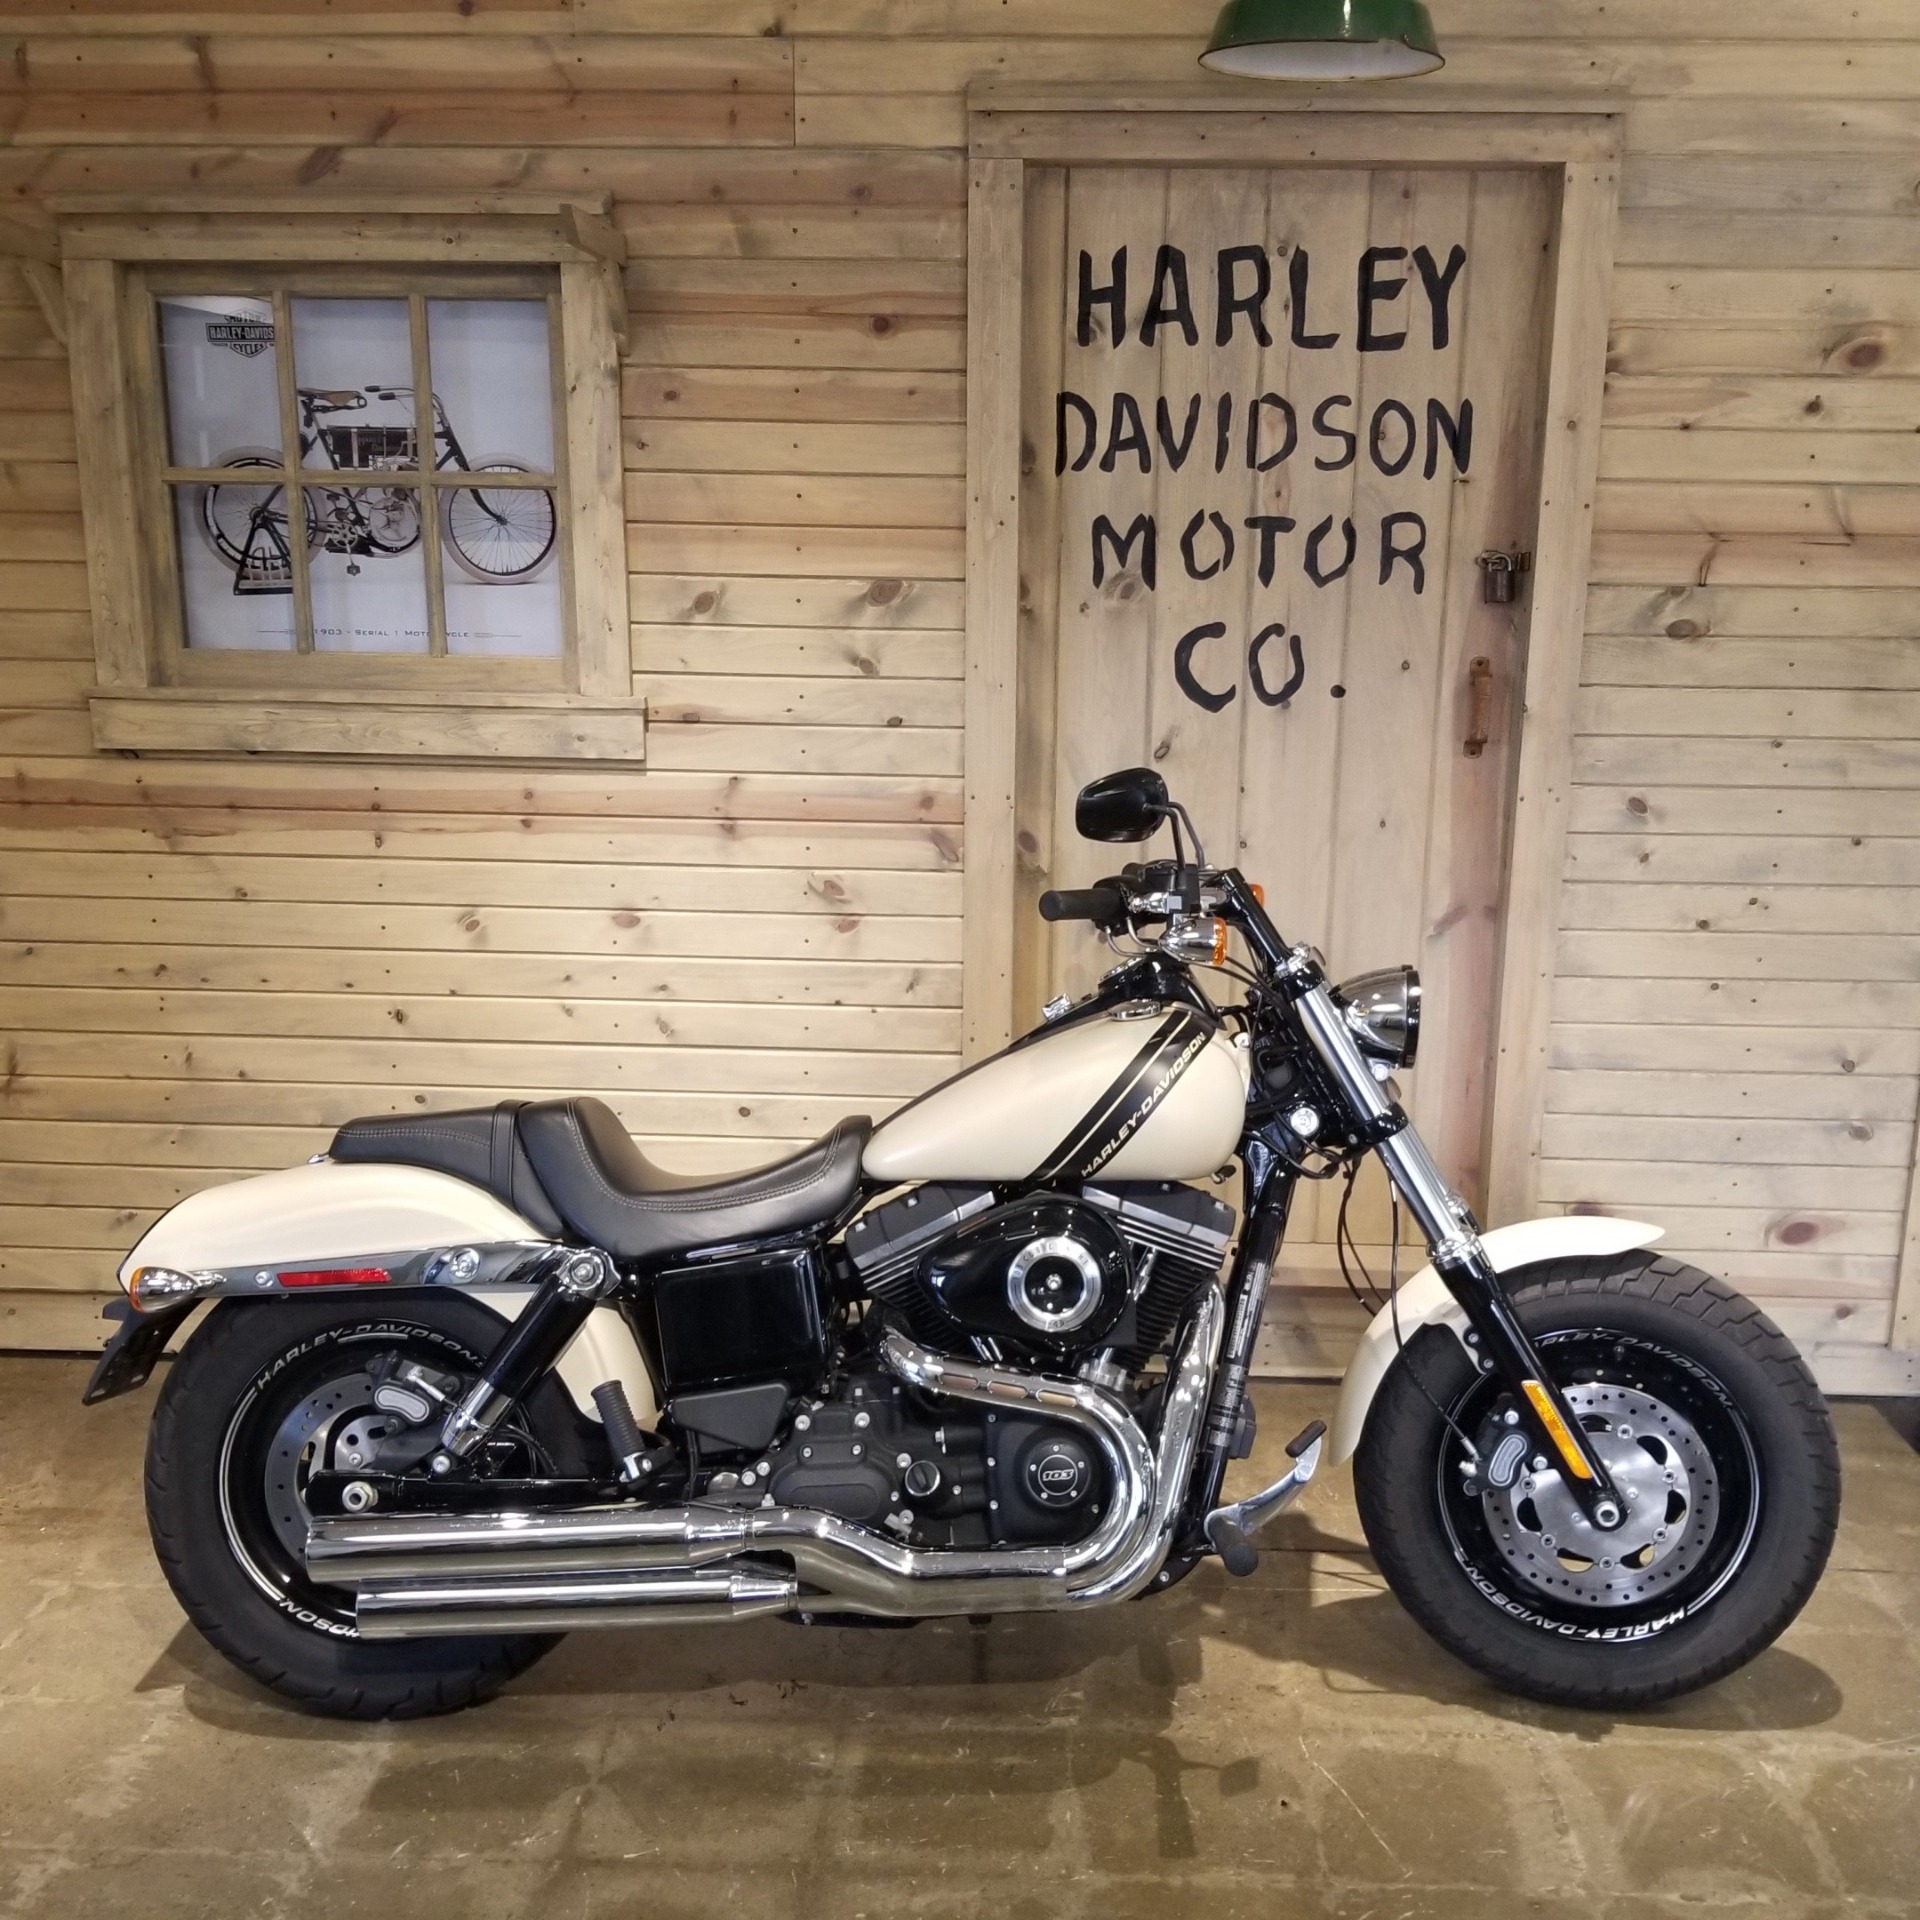 Used 2015 Harley Davidson Fat Bob Motorcycles In Mentor Oh Stock Number Up C304463